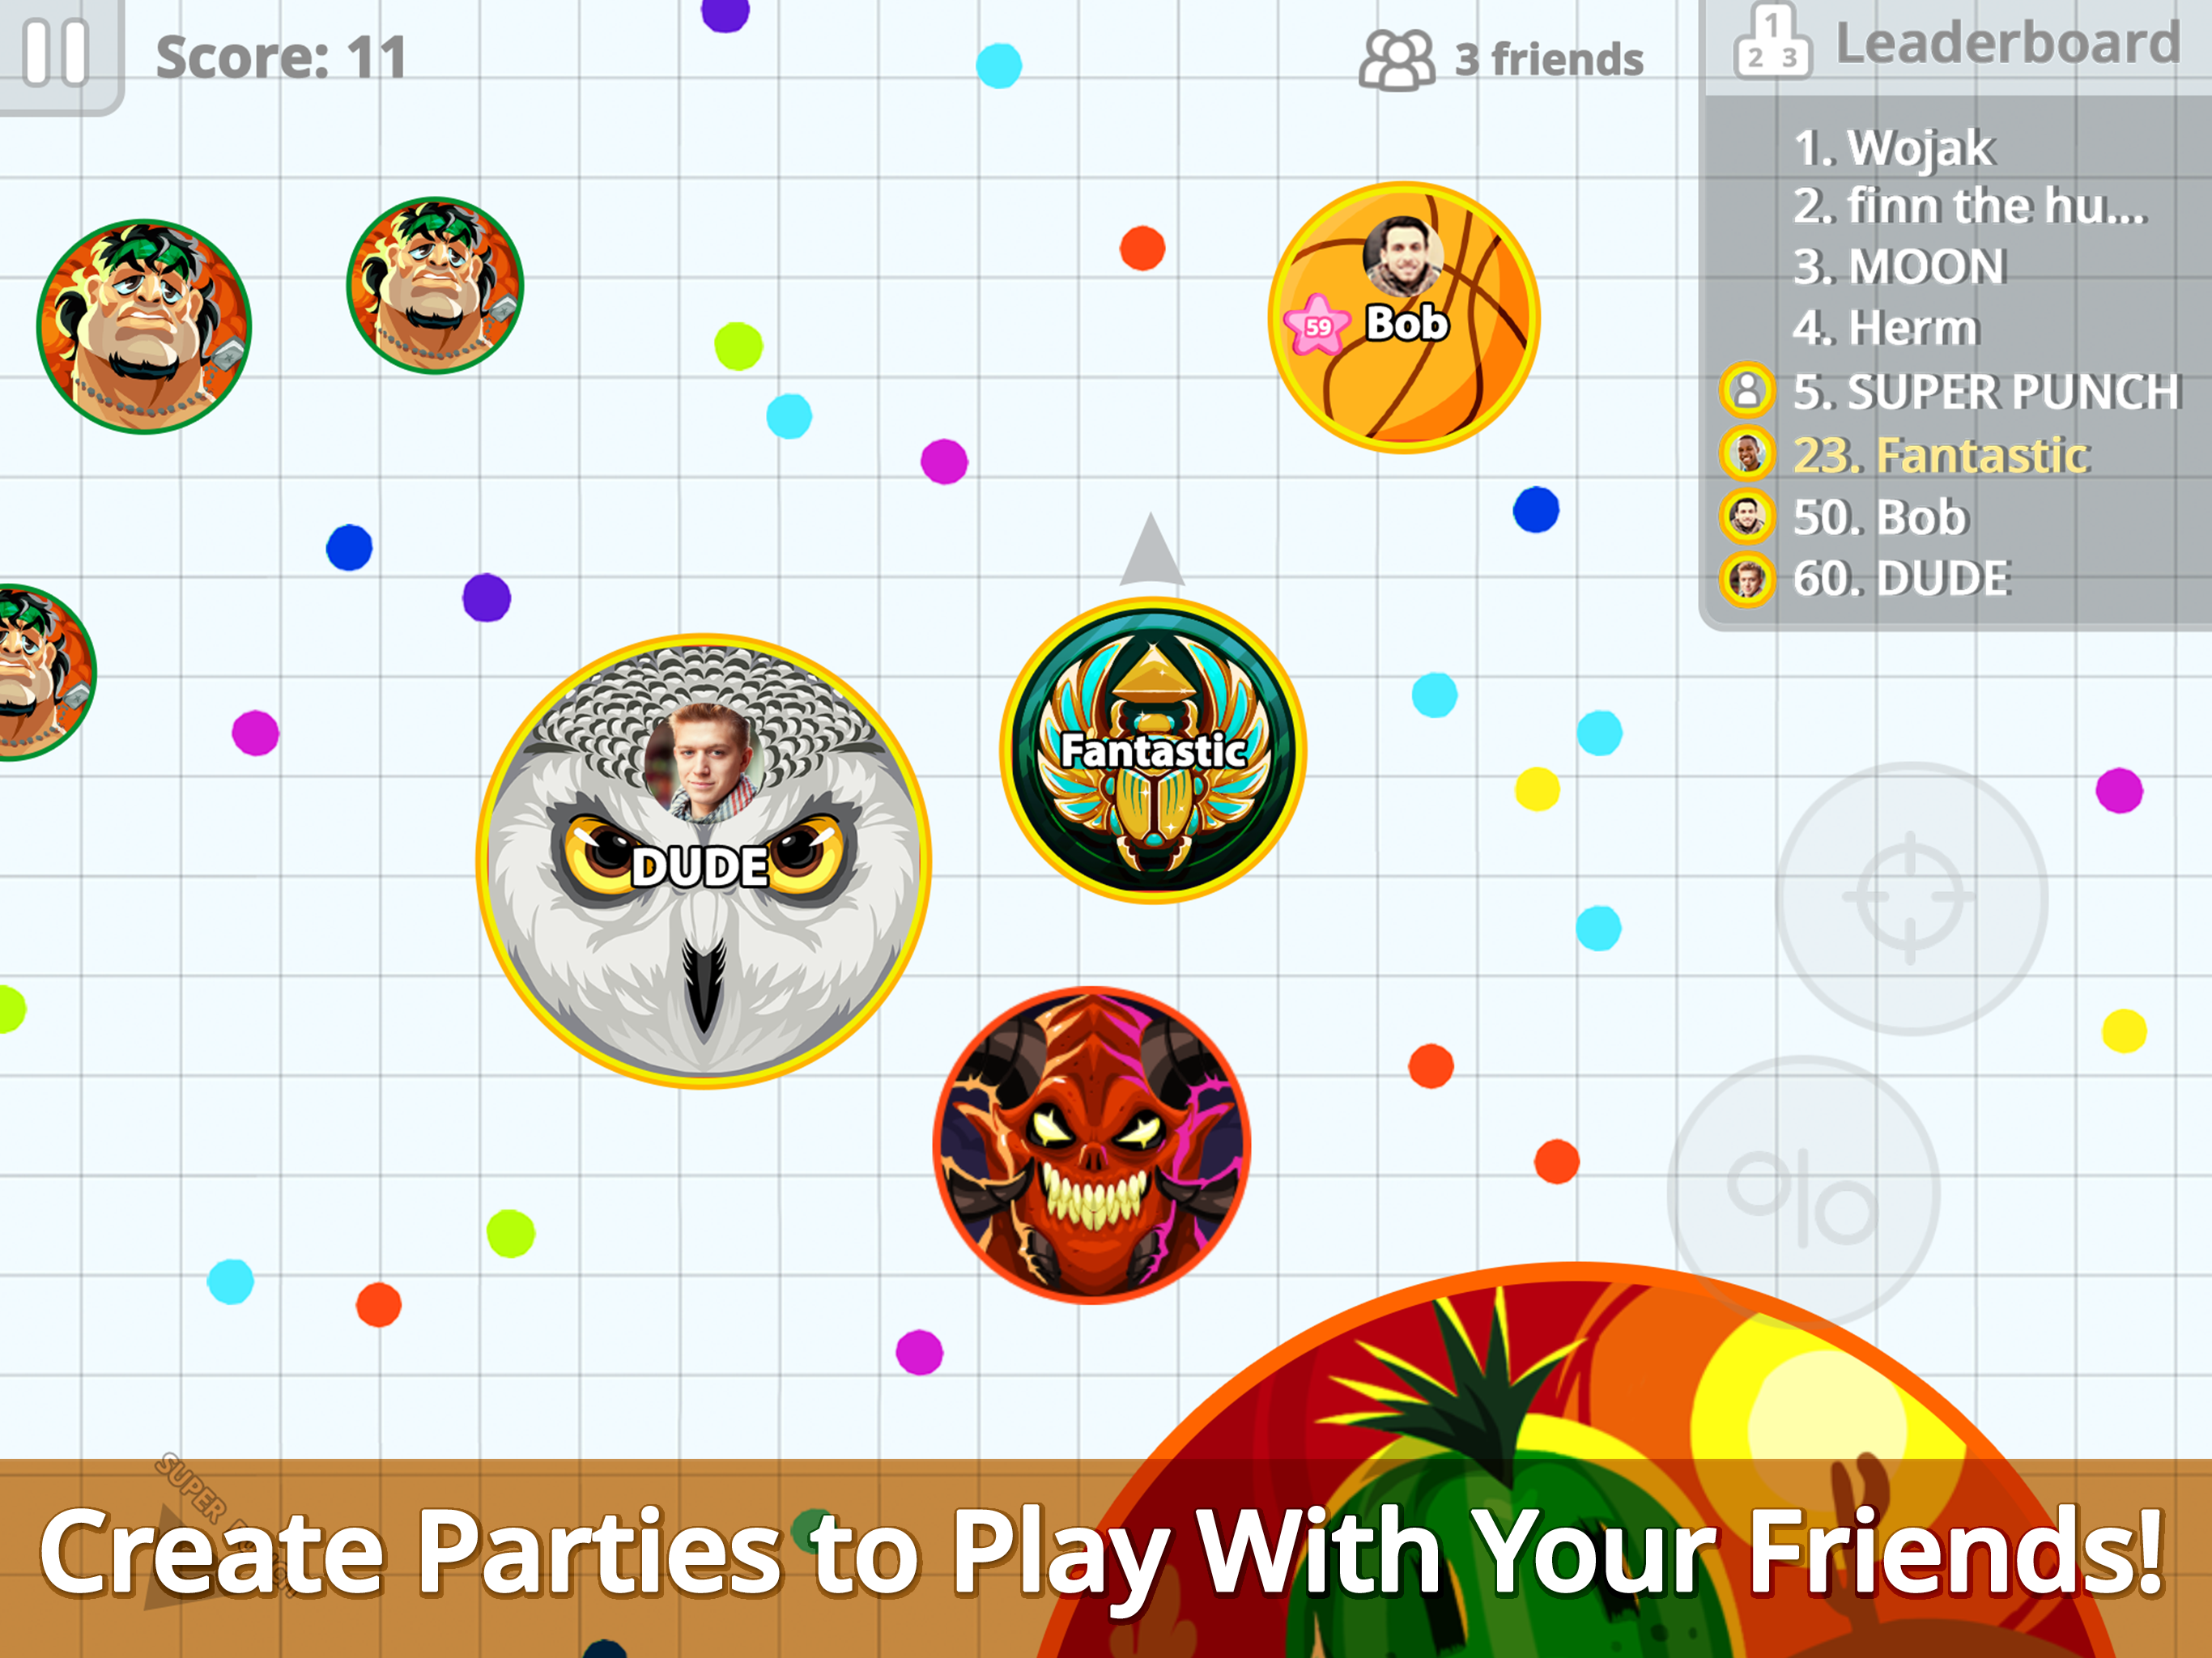 Party Mode in Agar.io – Miniclip Player Experience